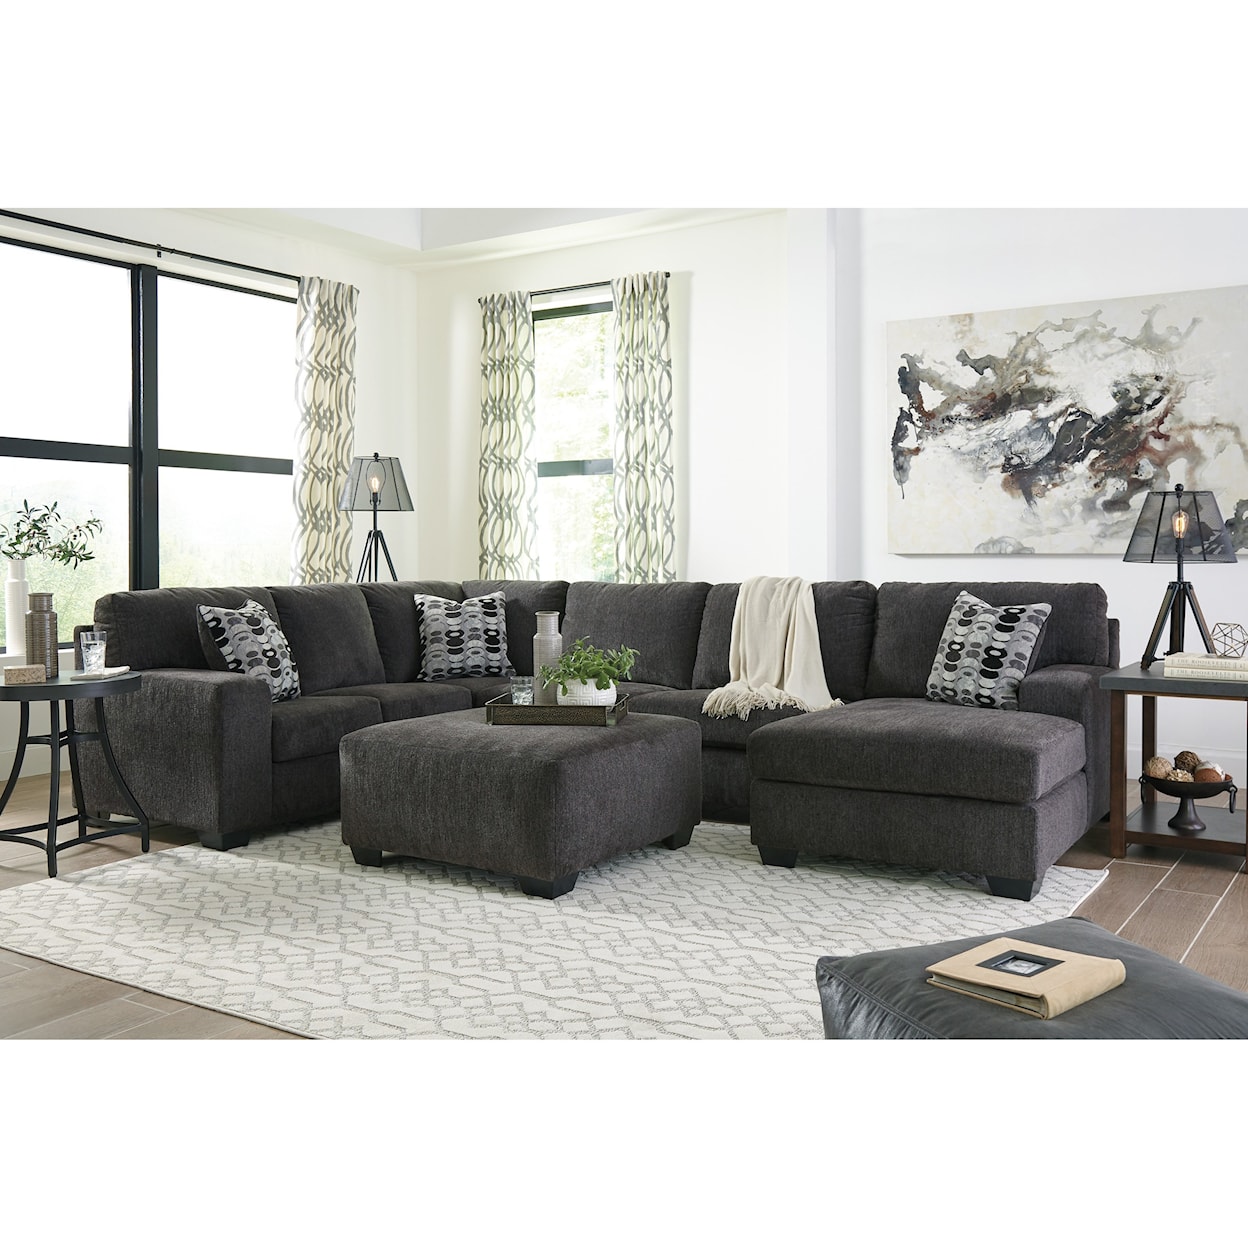 Signature Design by Ashley Ballinasloe 3pc Sectional and ottoman